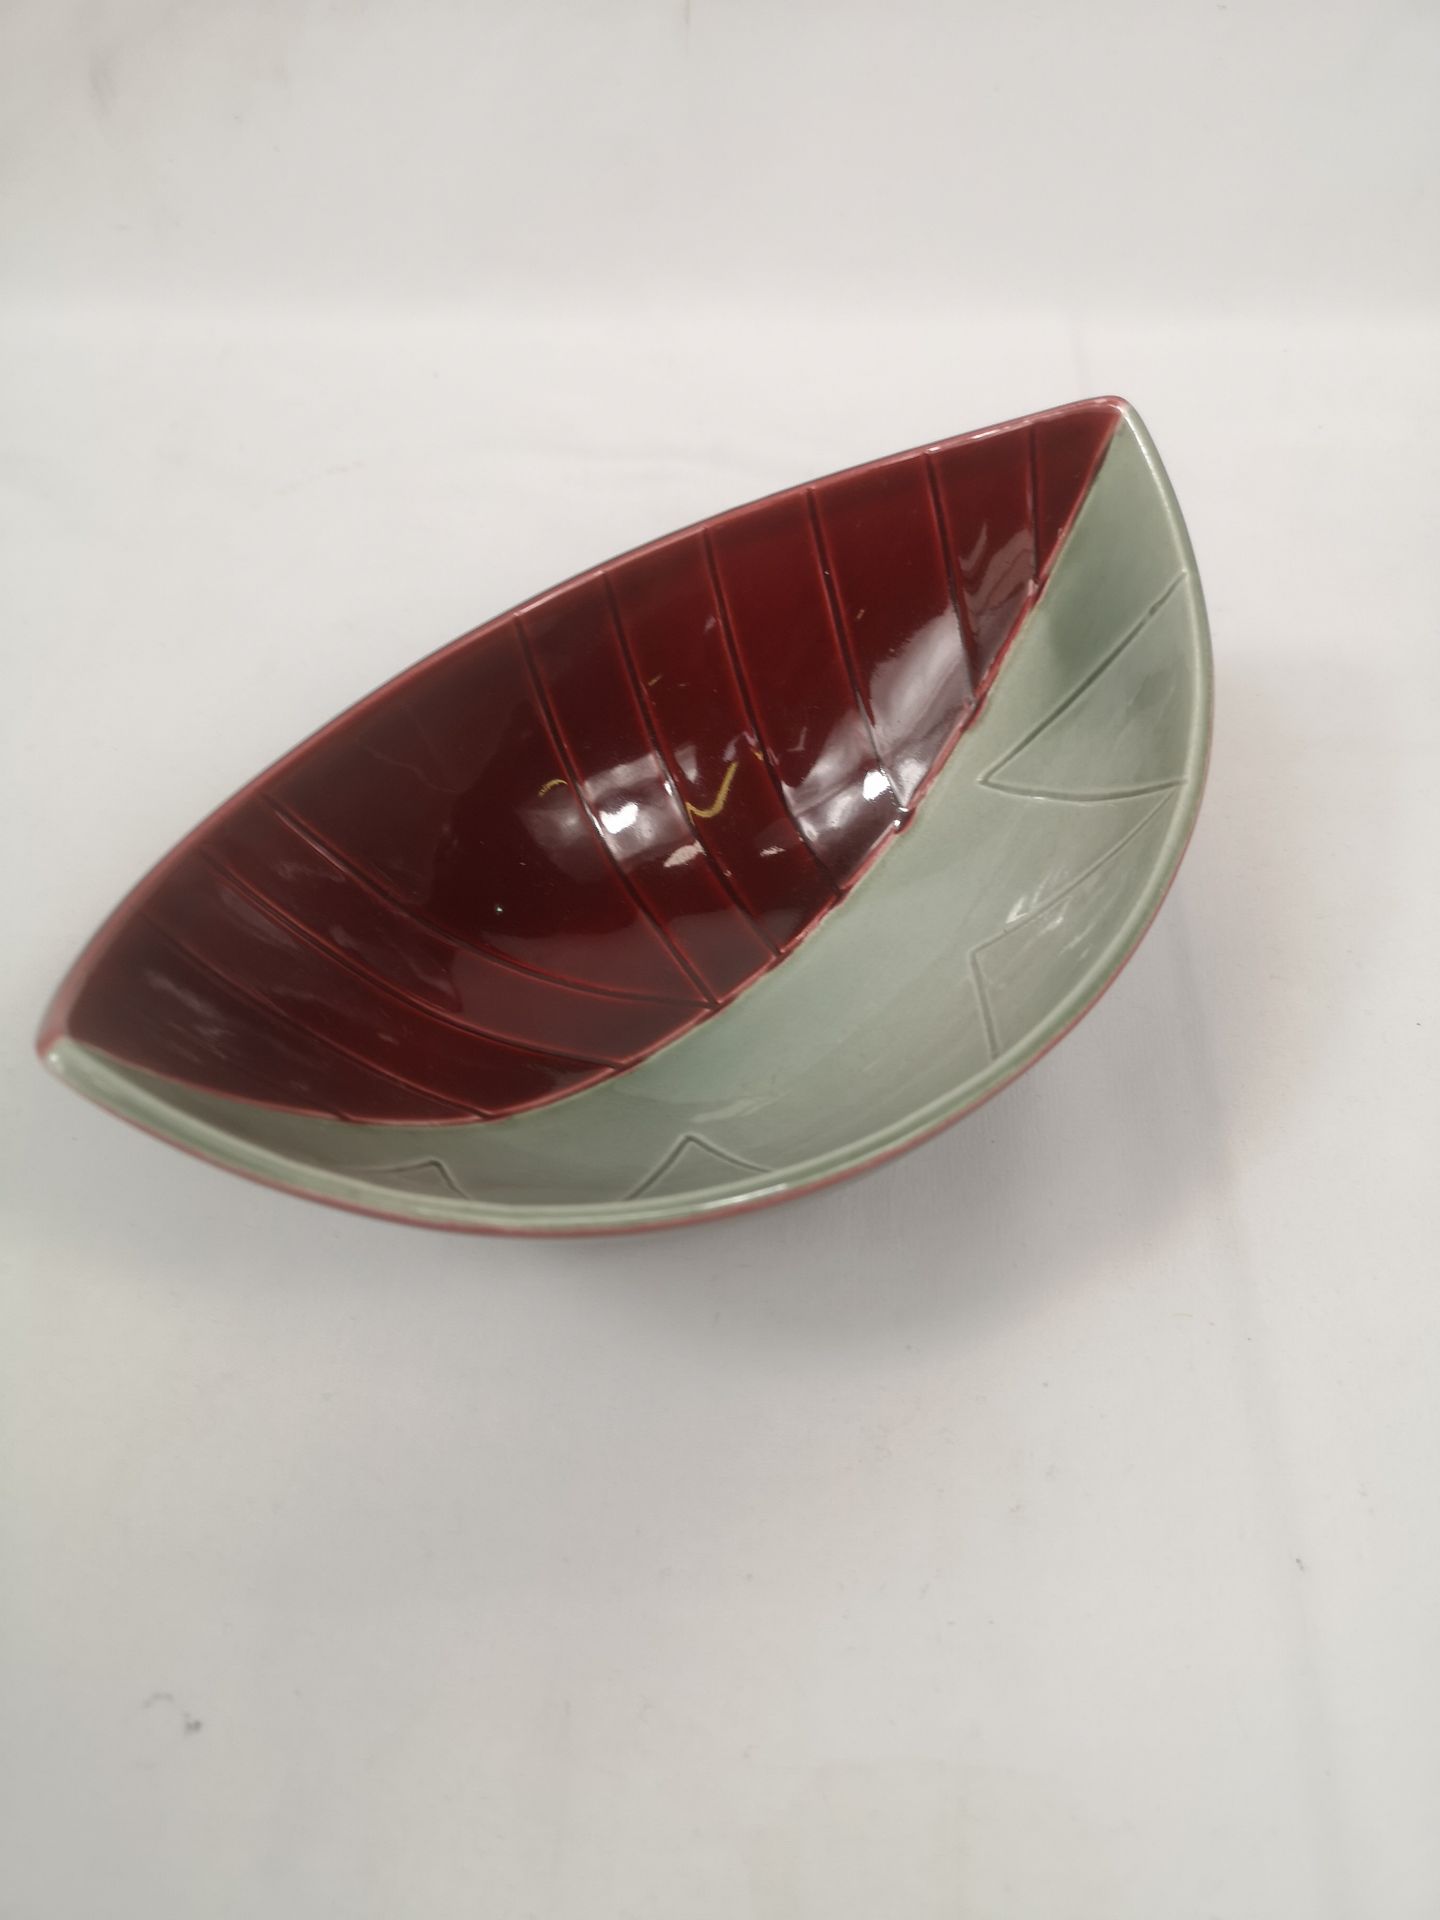 Collection of studio pottery - Image 10 of 12